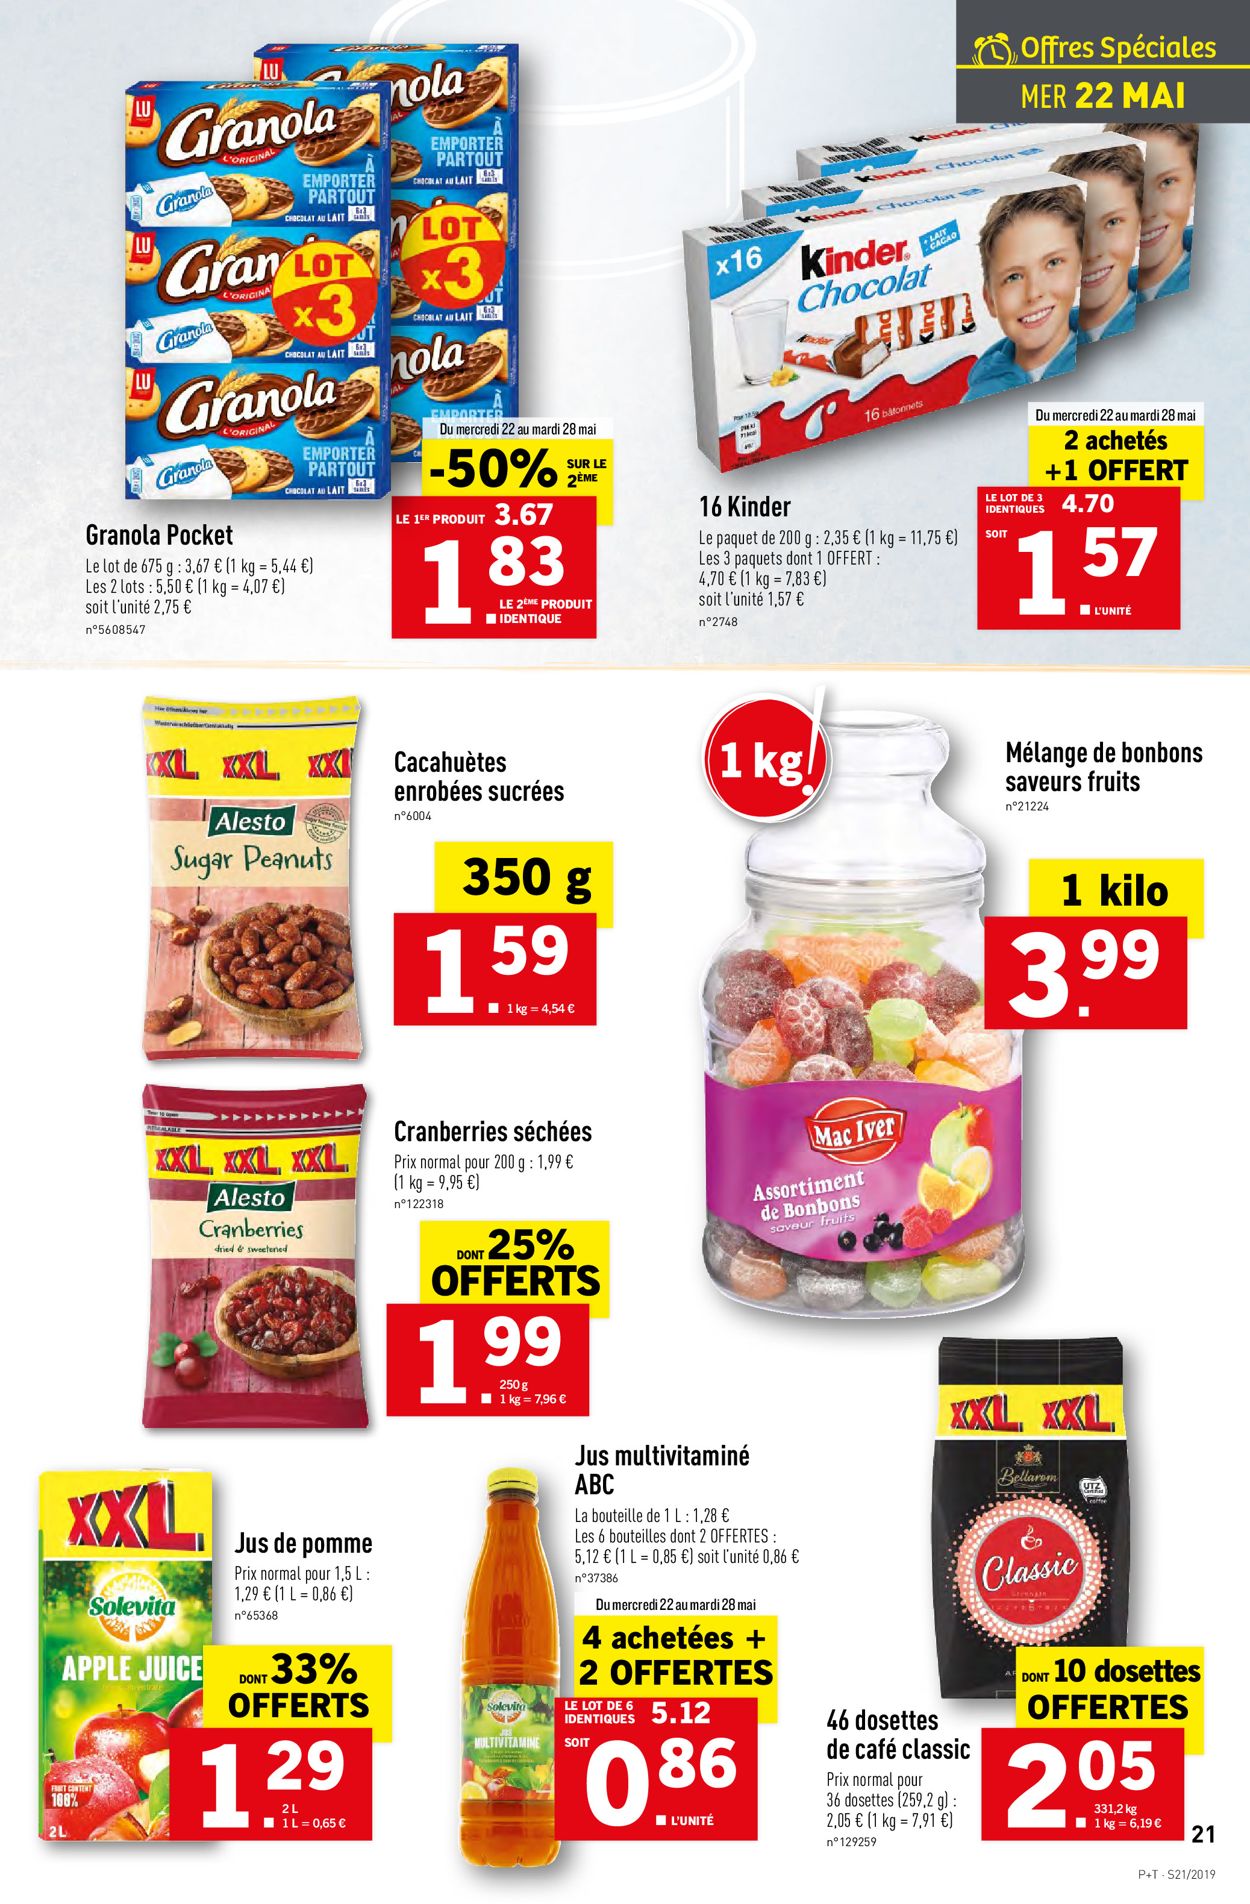 Lidl Catalogue - 22.05-28.05.2019 (Page 21)